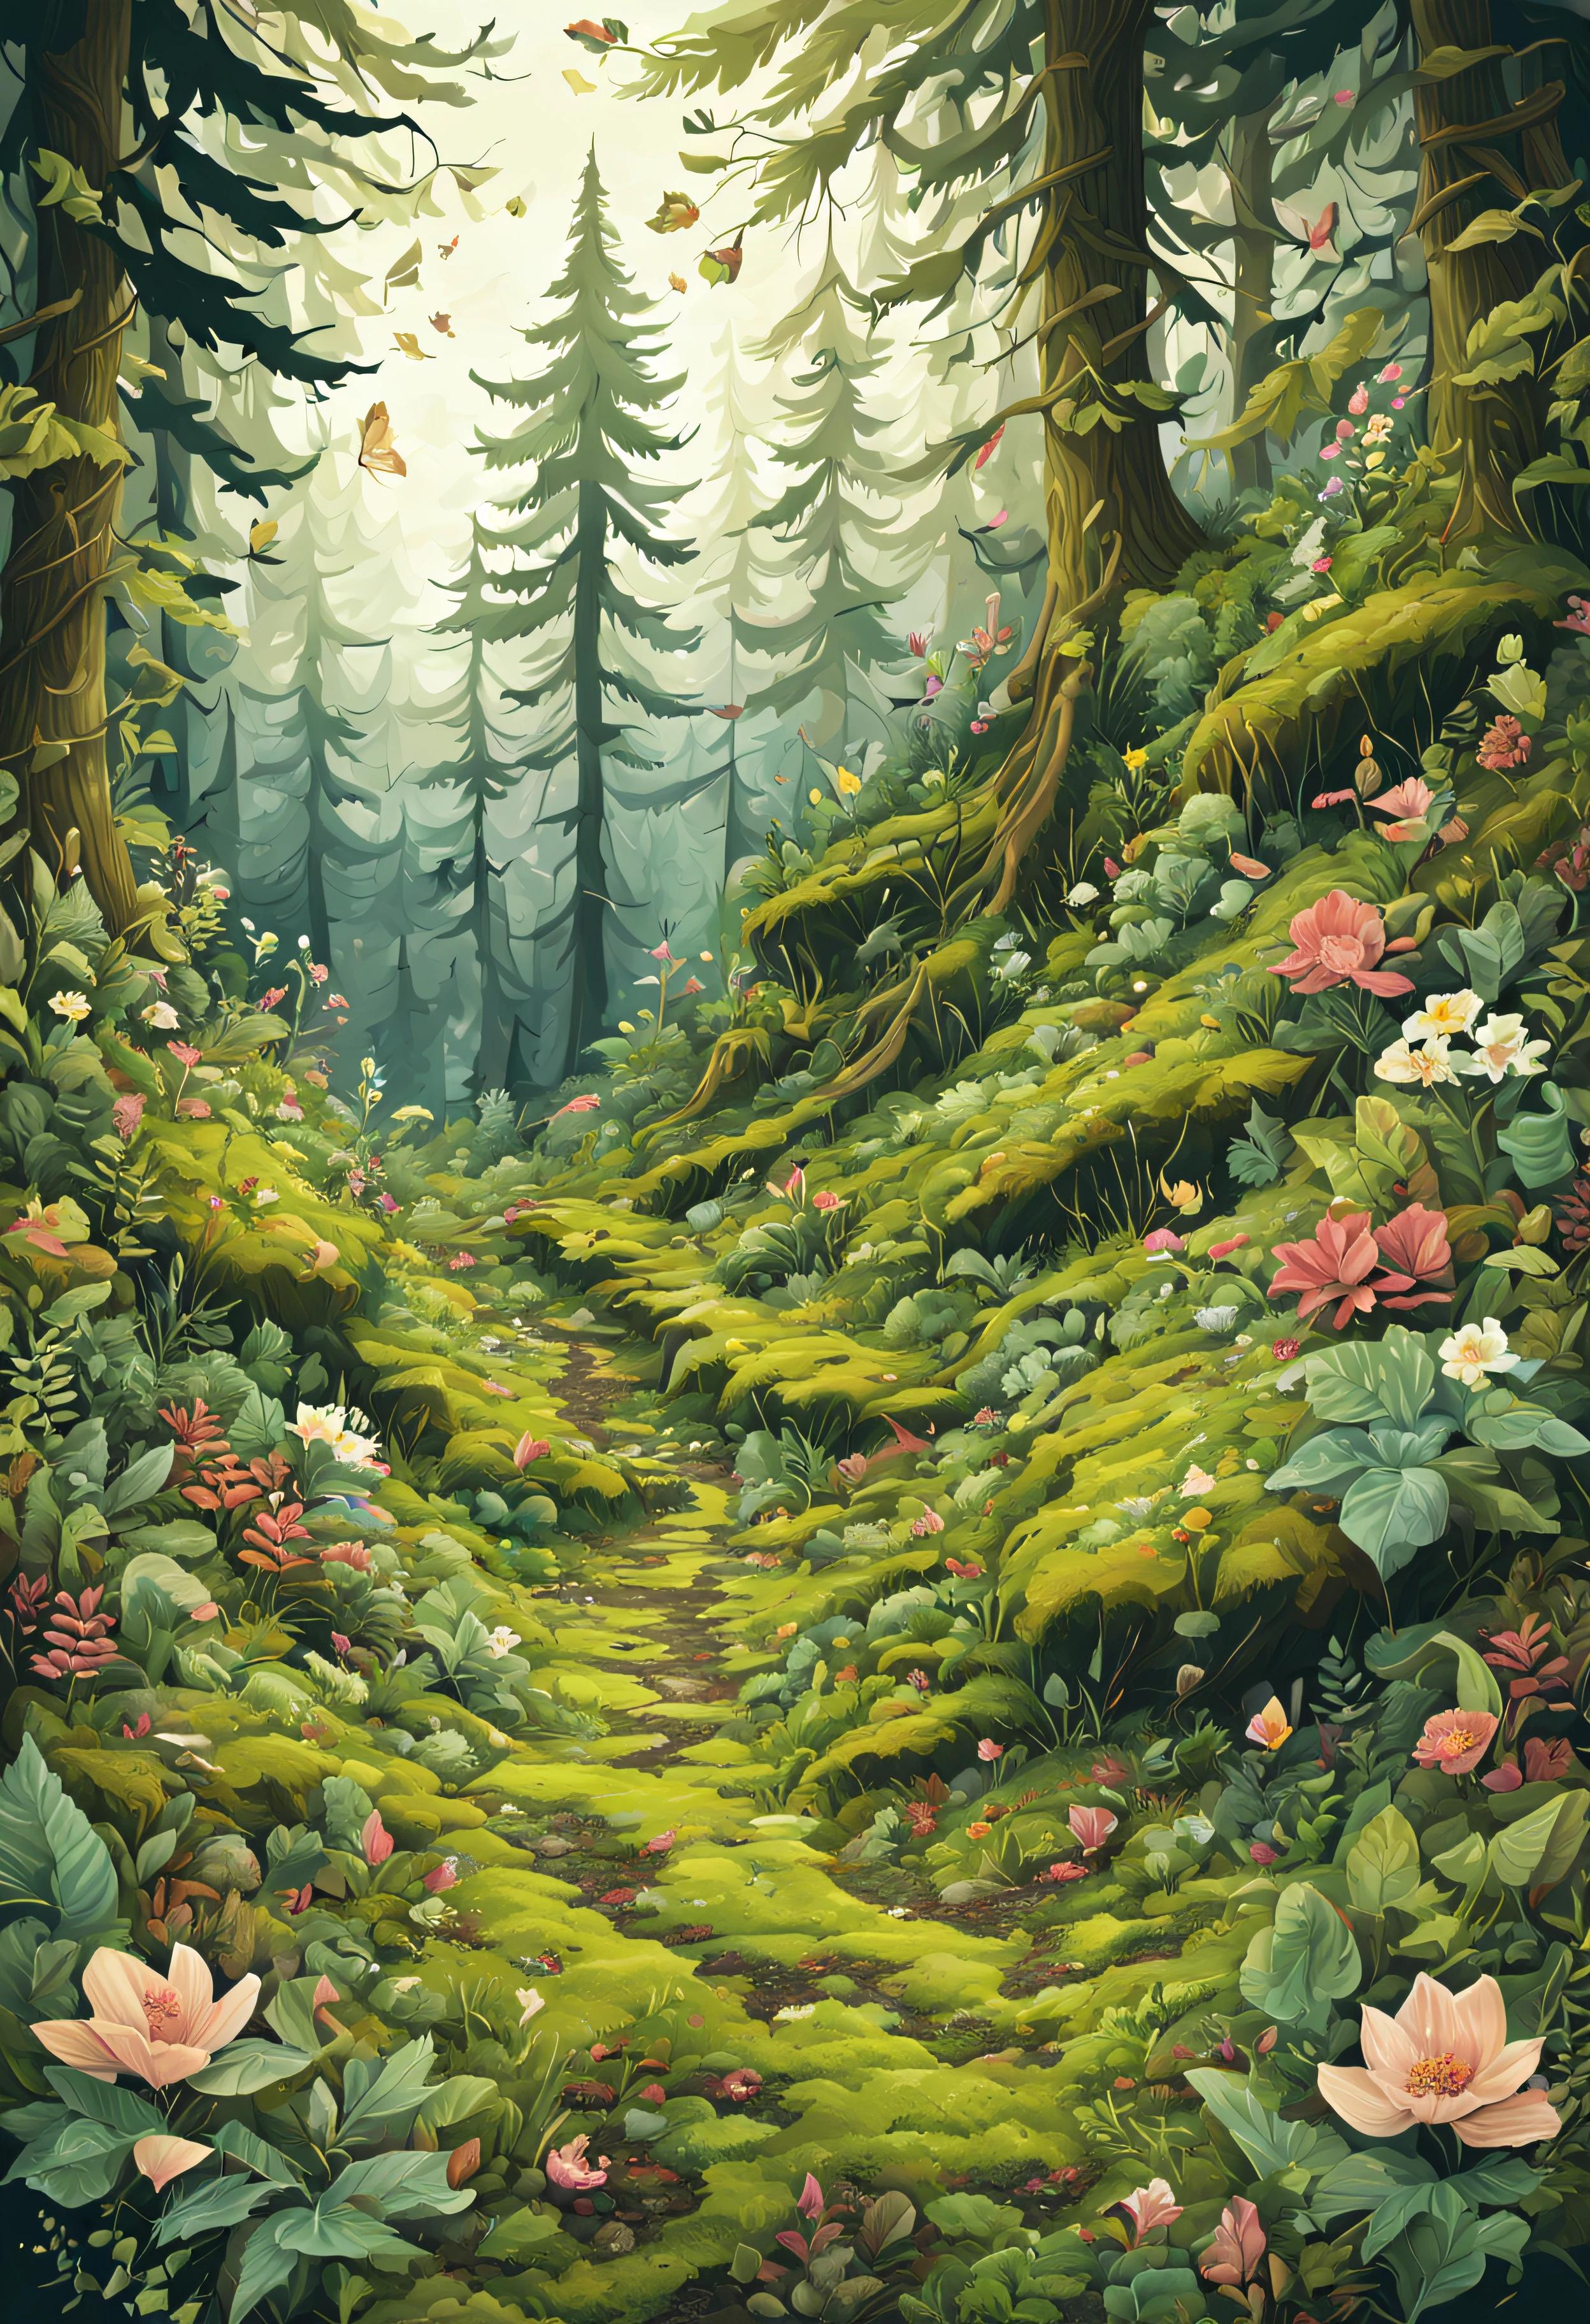 PEEpicLand, illustration,
Forrest, moss, leafs on ground, blooming flowers